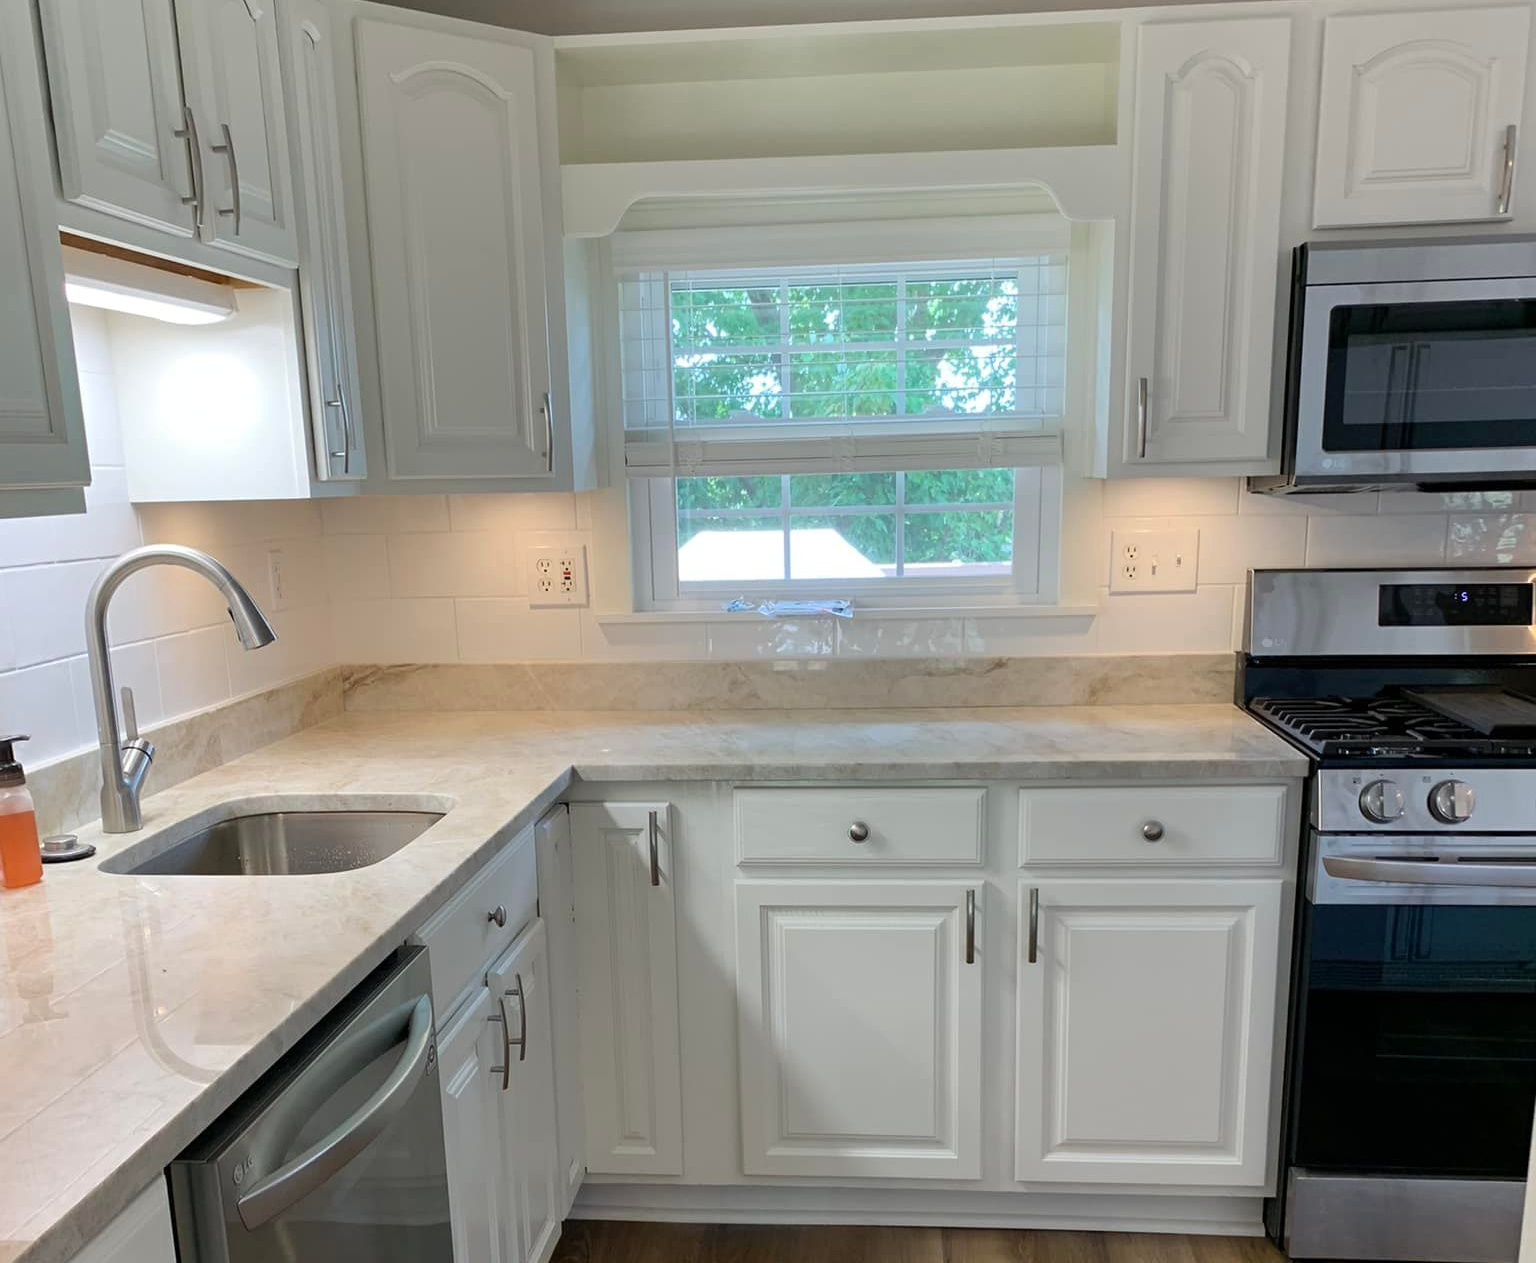 cabinets refinished white by Obringer's Painting and Remodeling